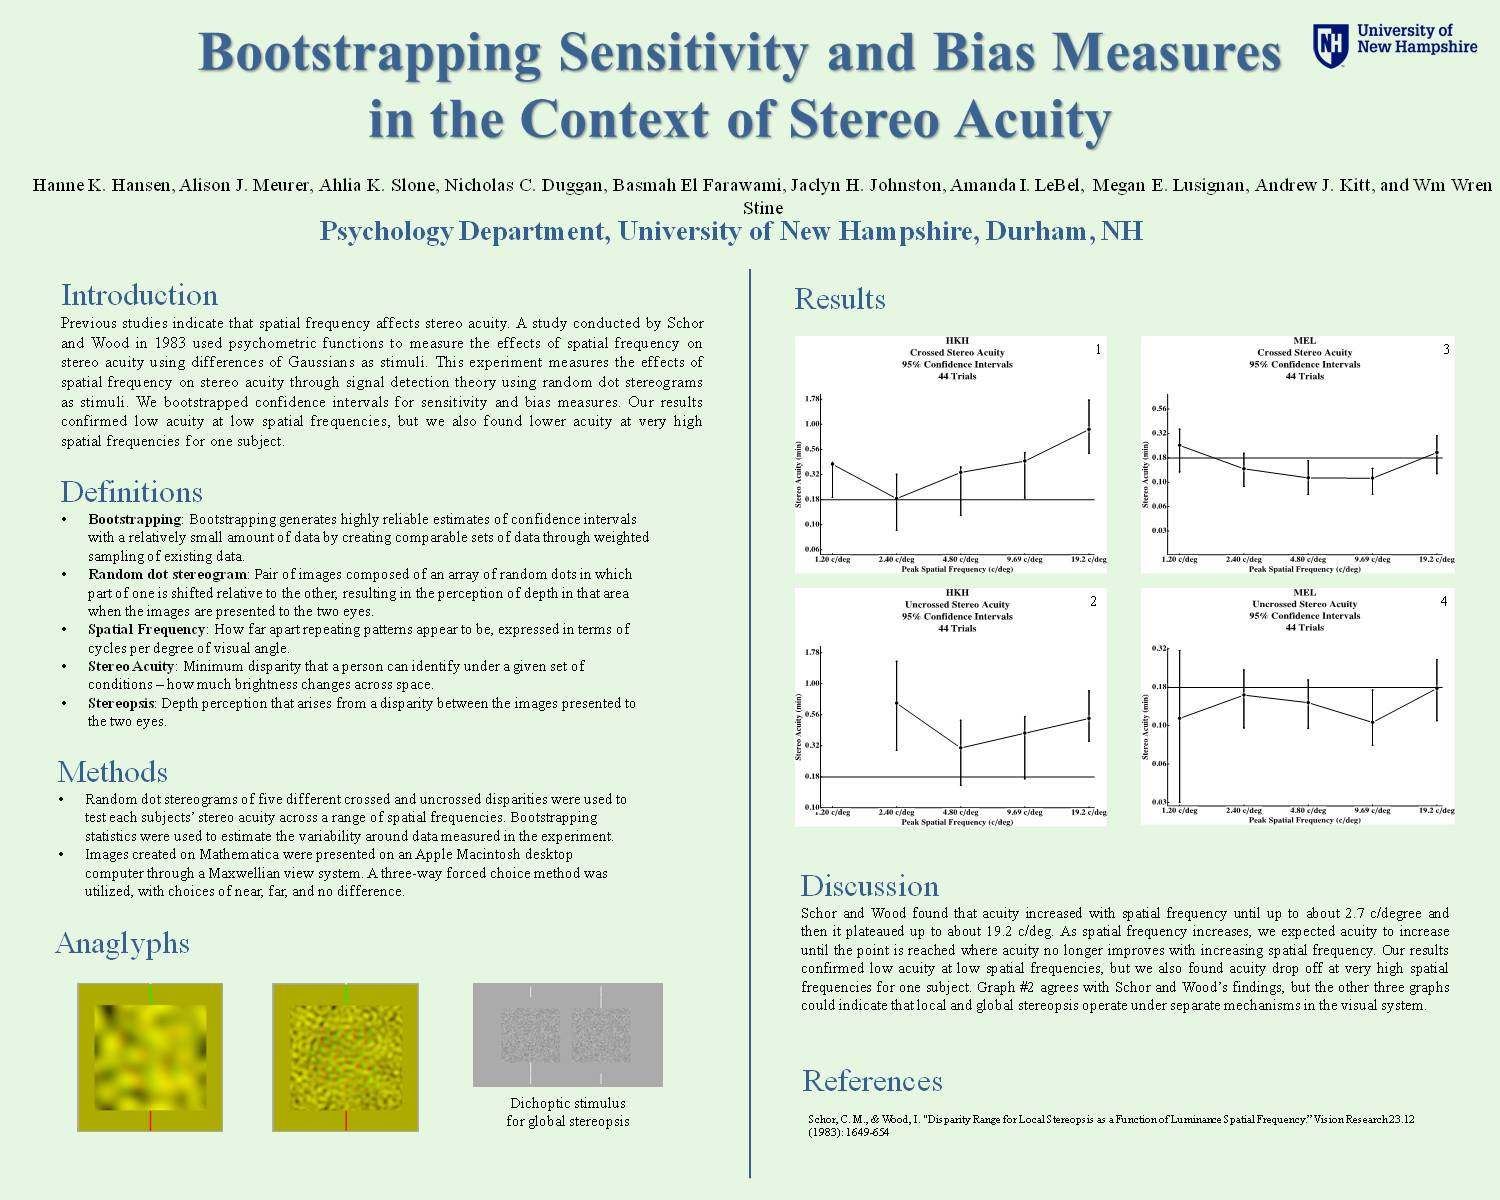 Bootstrapping Sensitivity And Bias Measures In The Context Of Stereo Acuity by hkk24